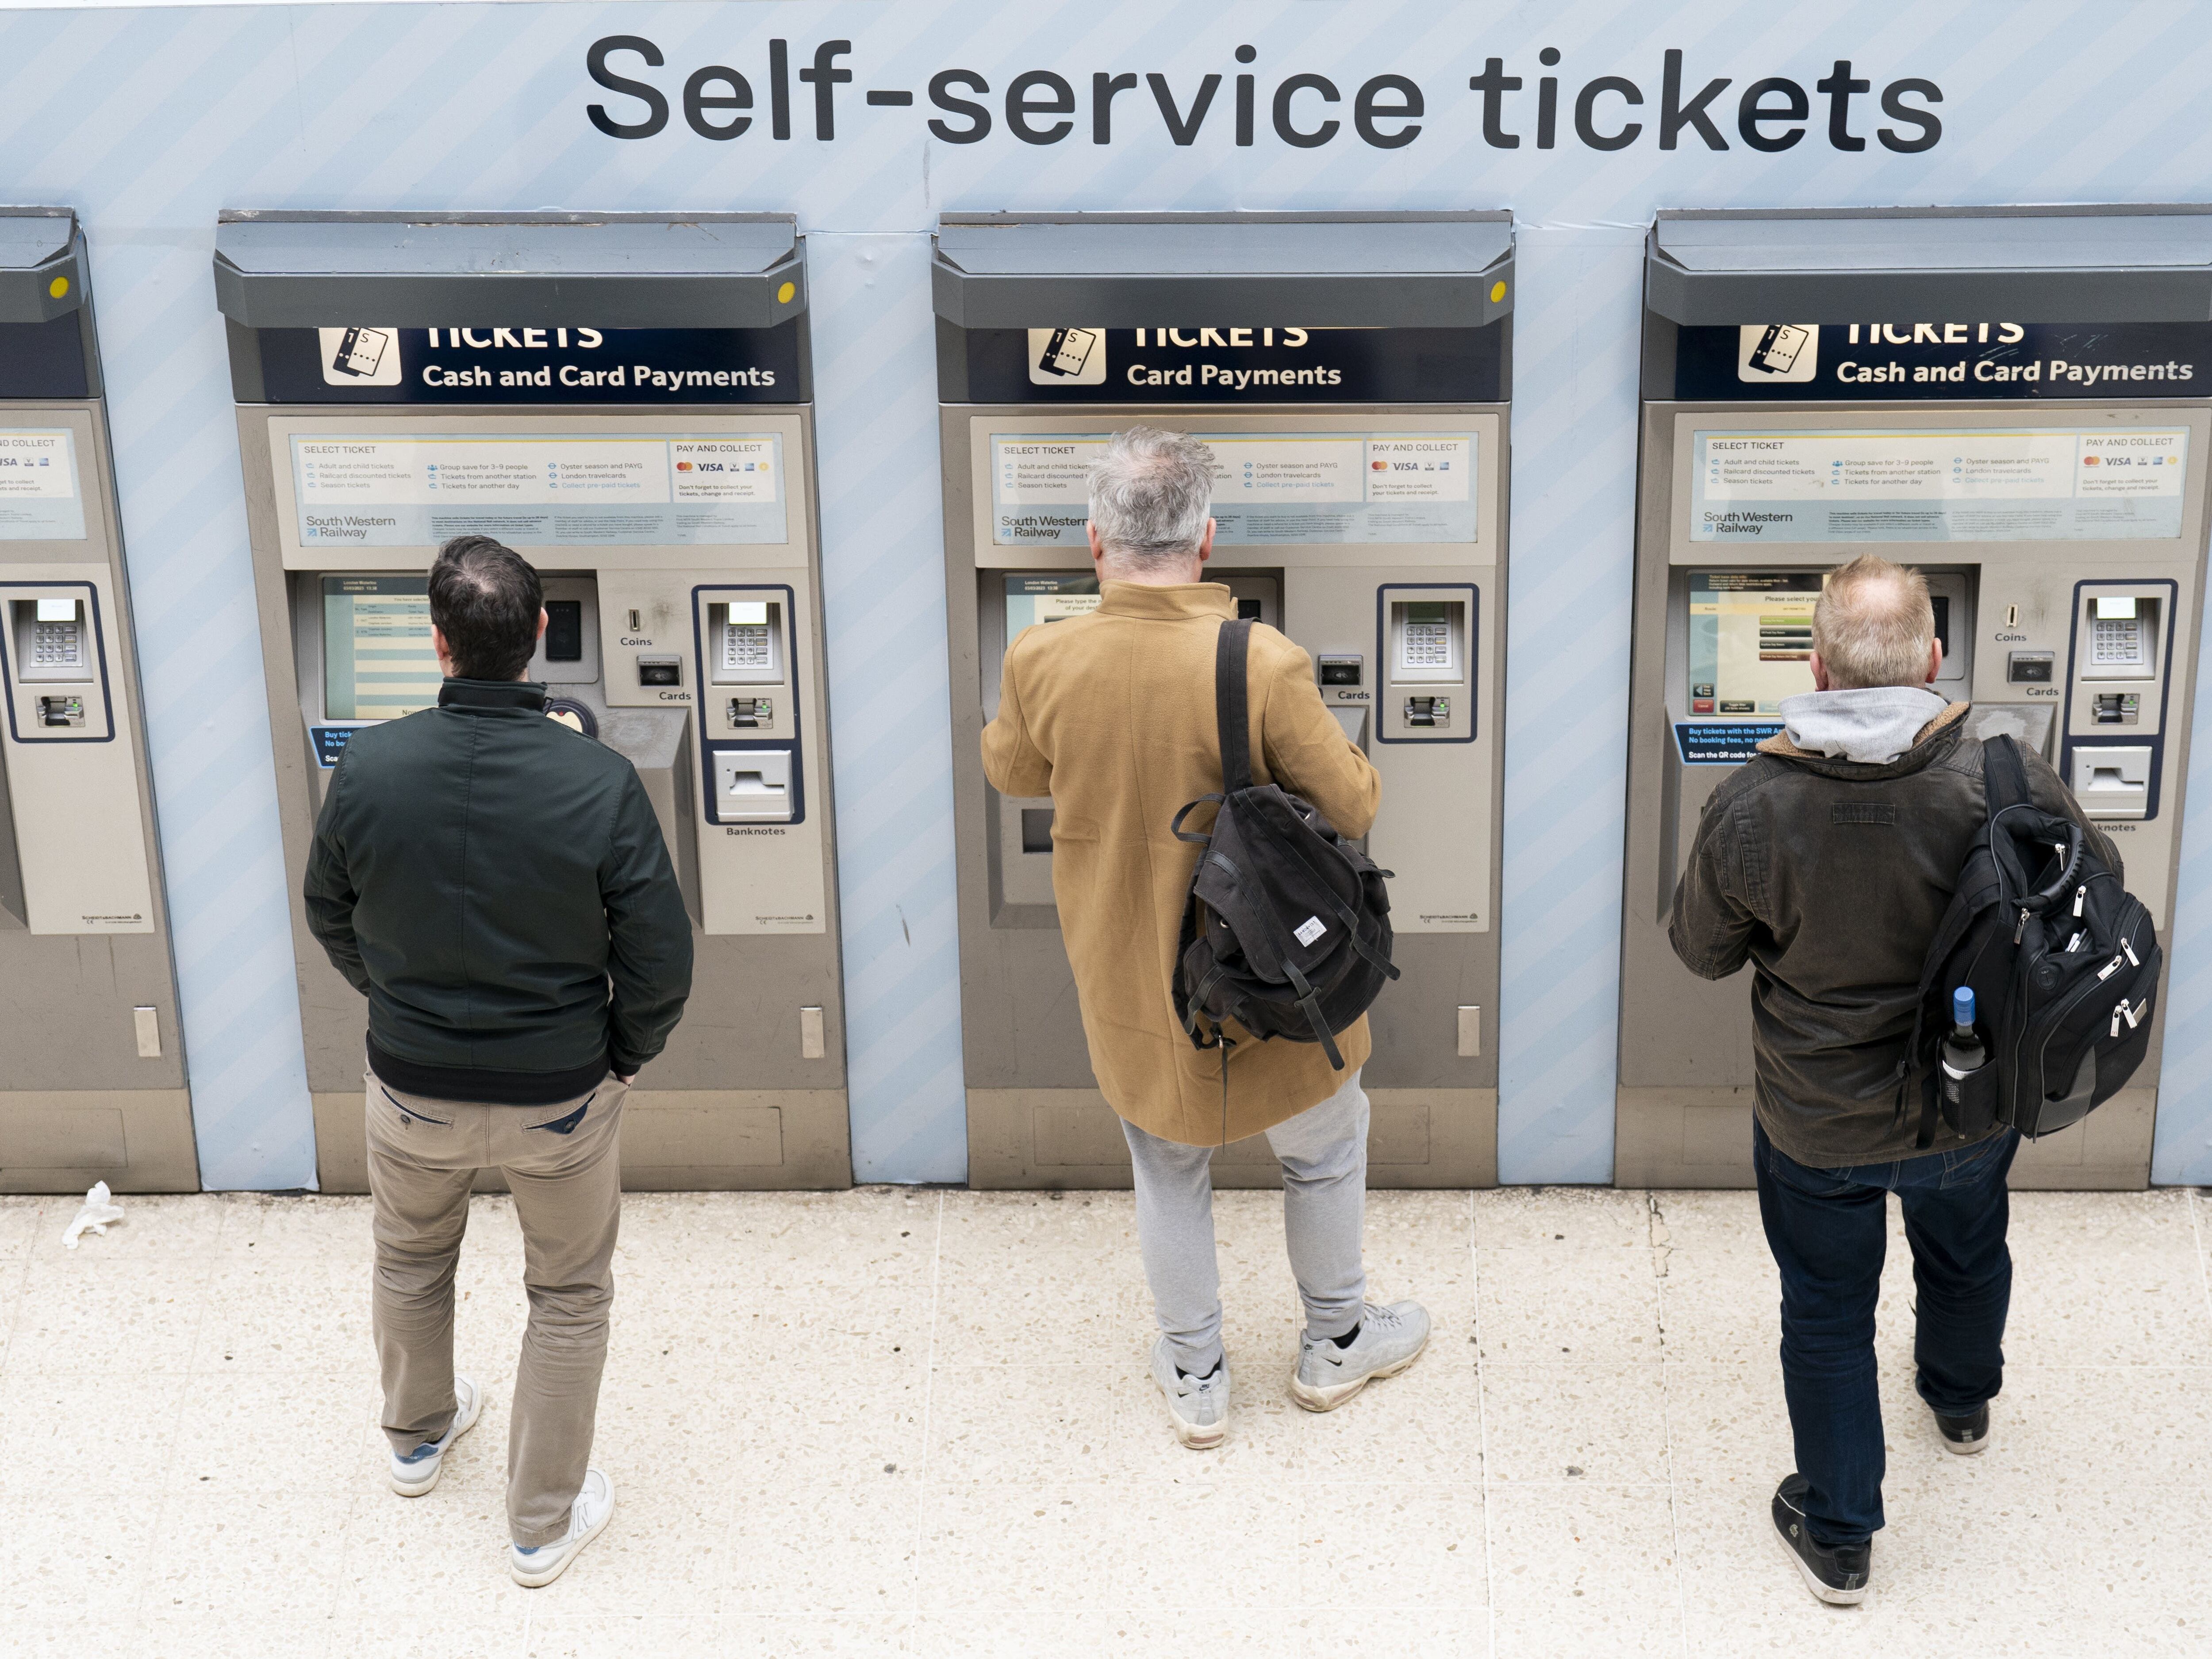 Rail season tickets at record low due to home working